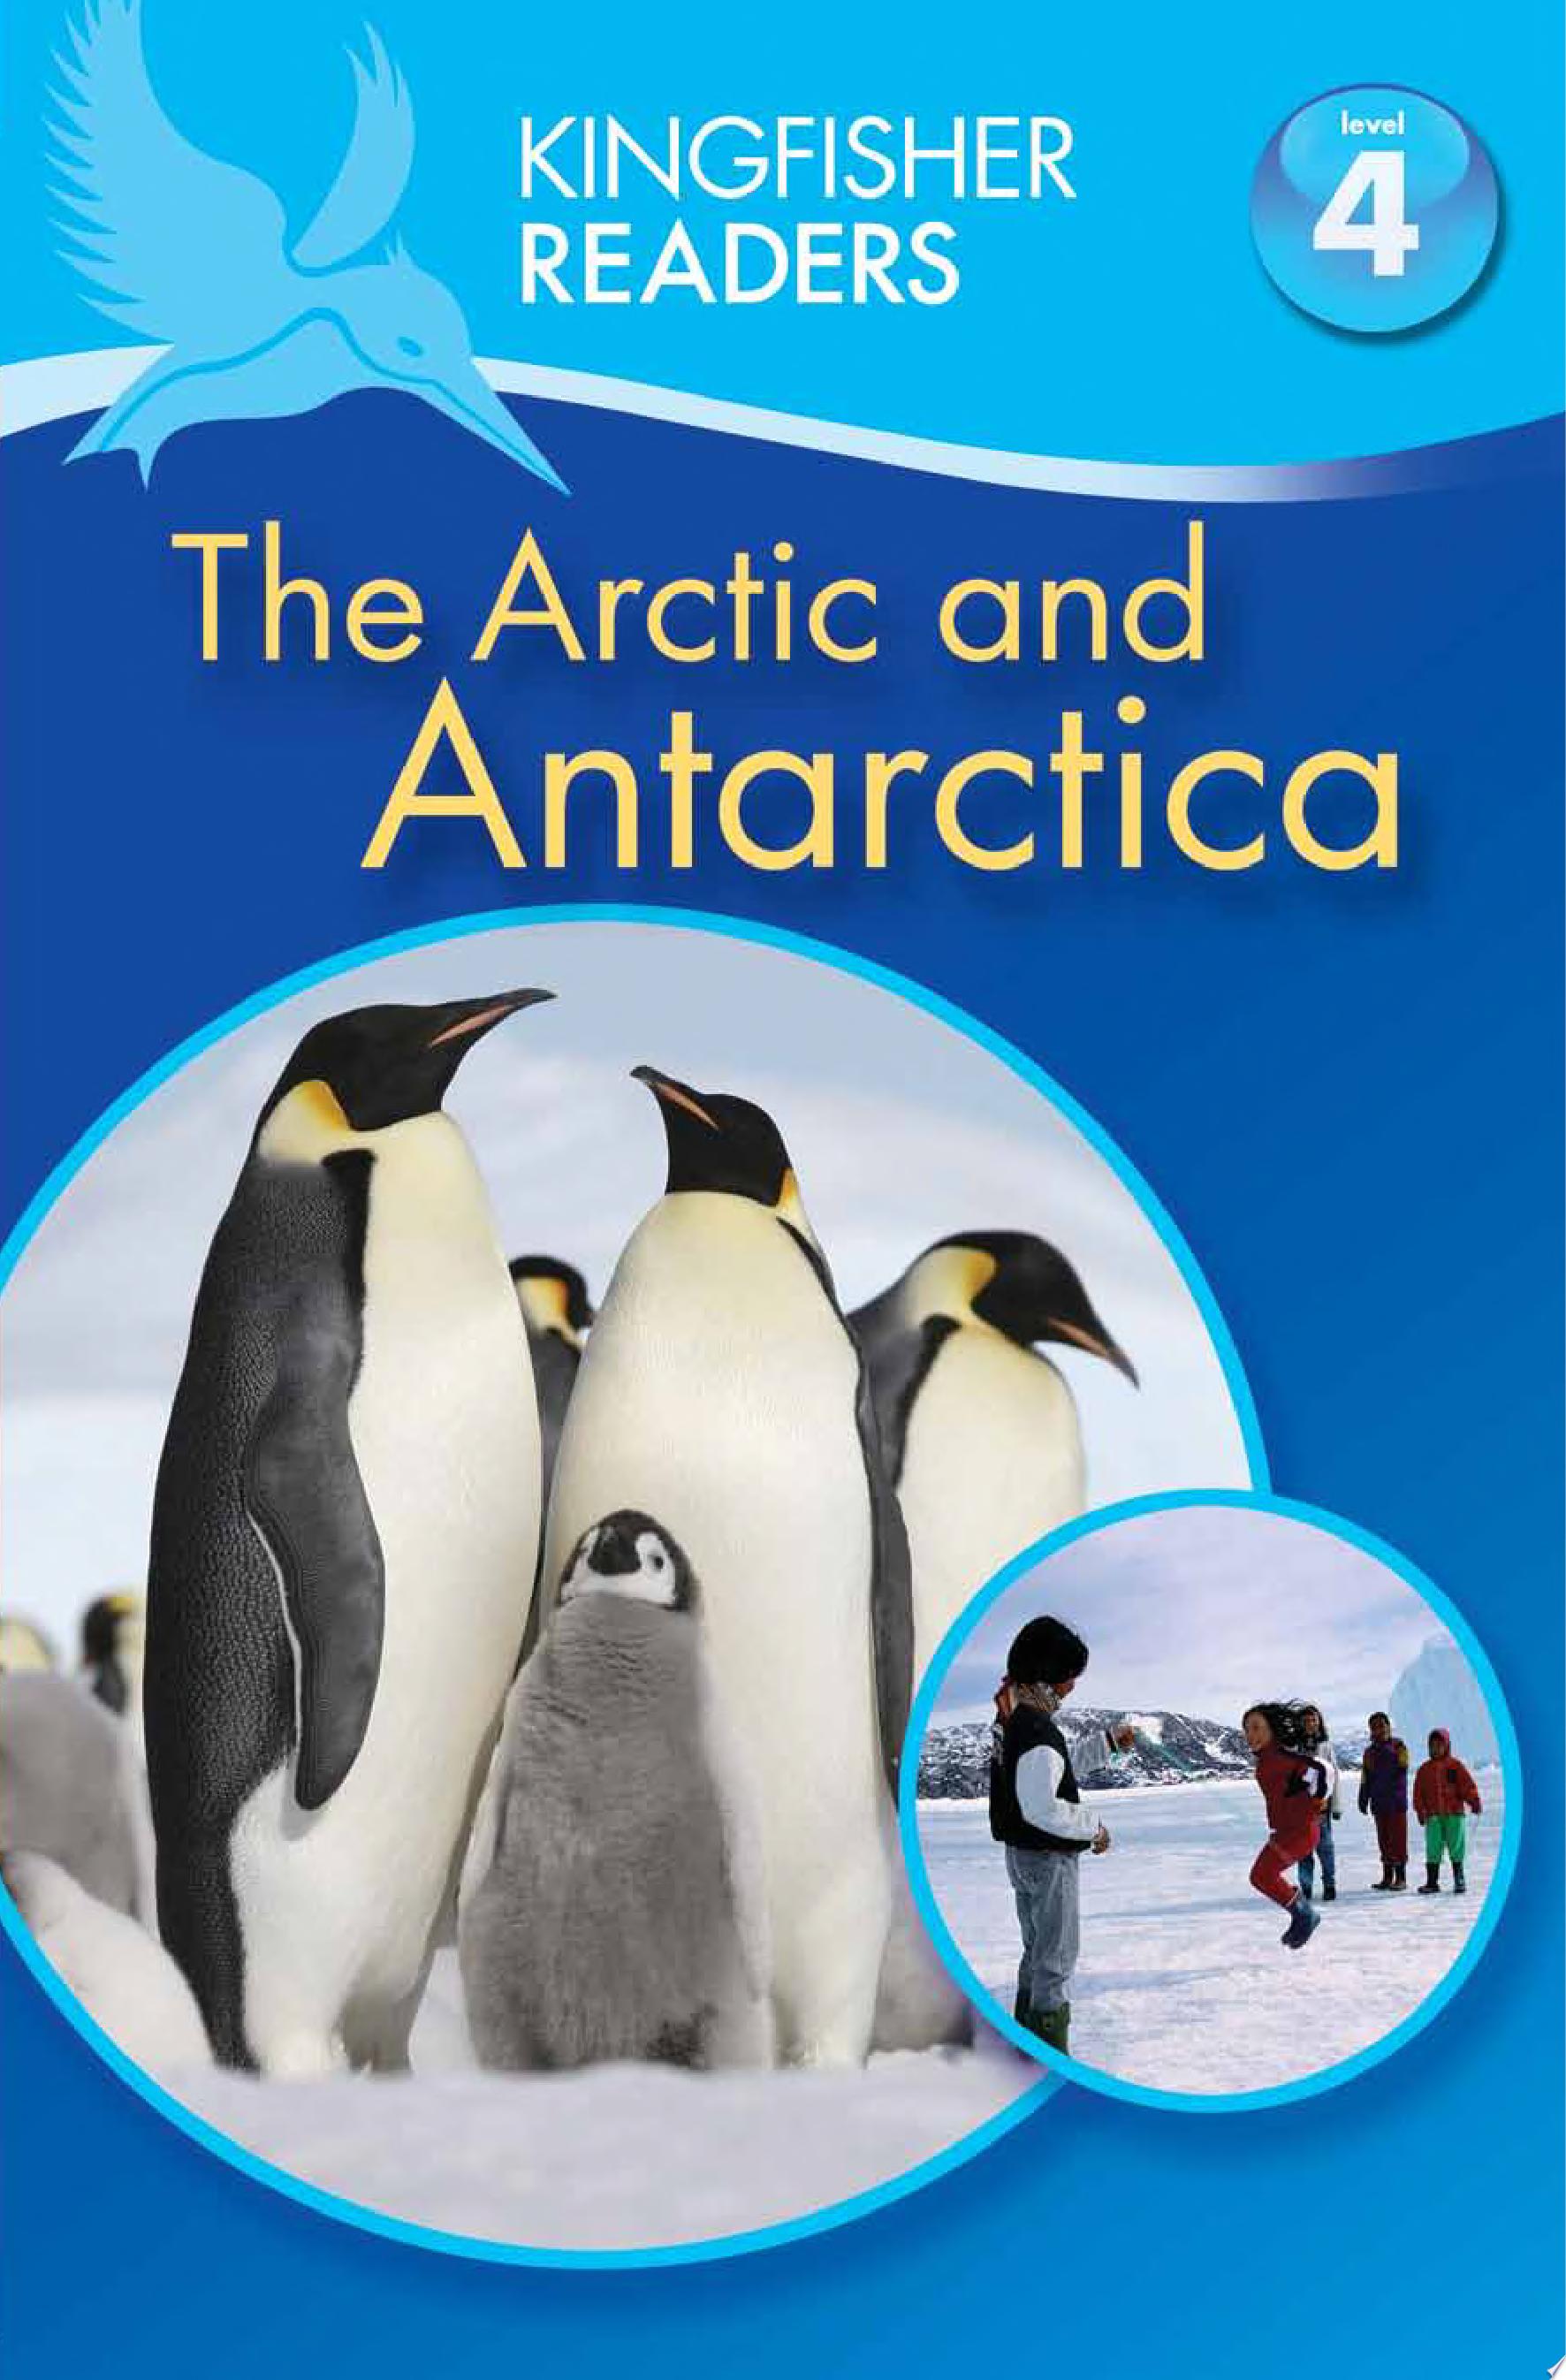 Image for "The Arctic and Antarctica"